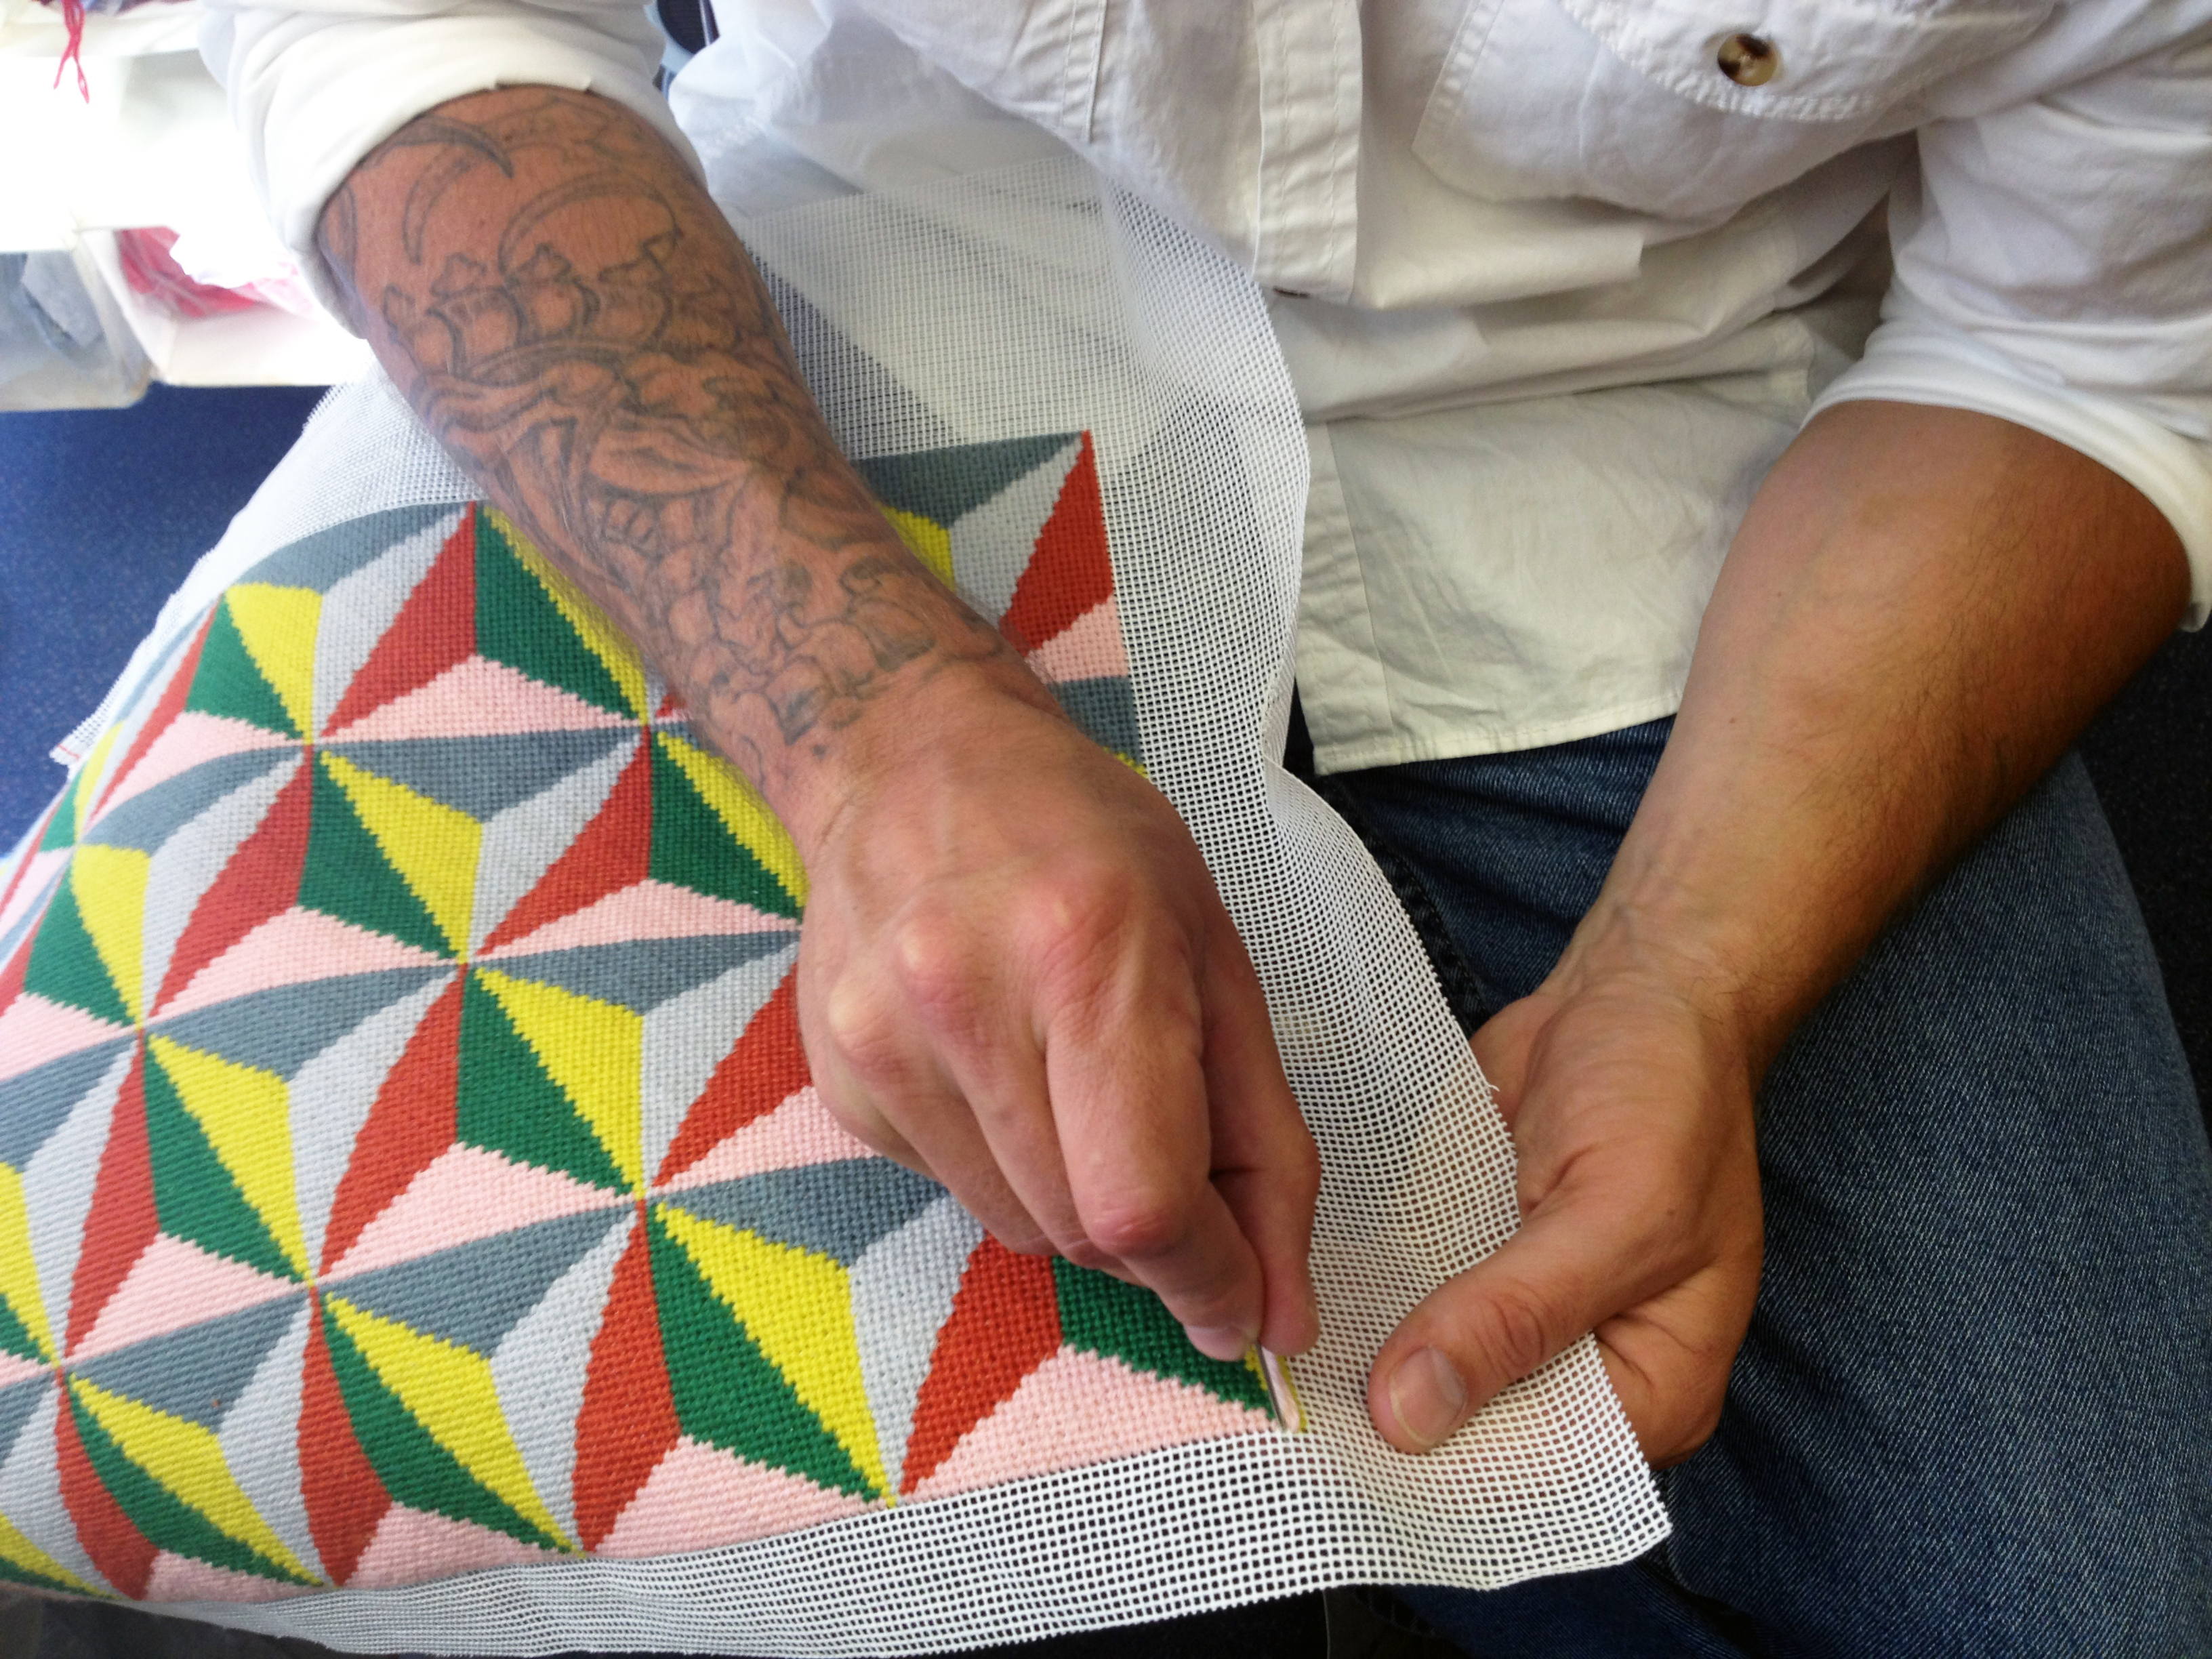 Prisoner embroidering a cushion cover from the charity Fine Cell Work